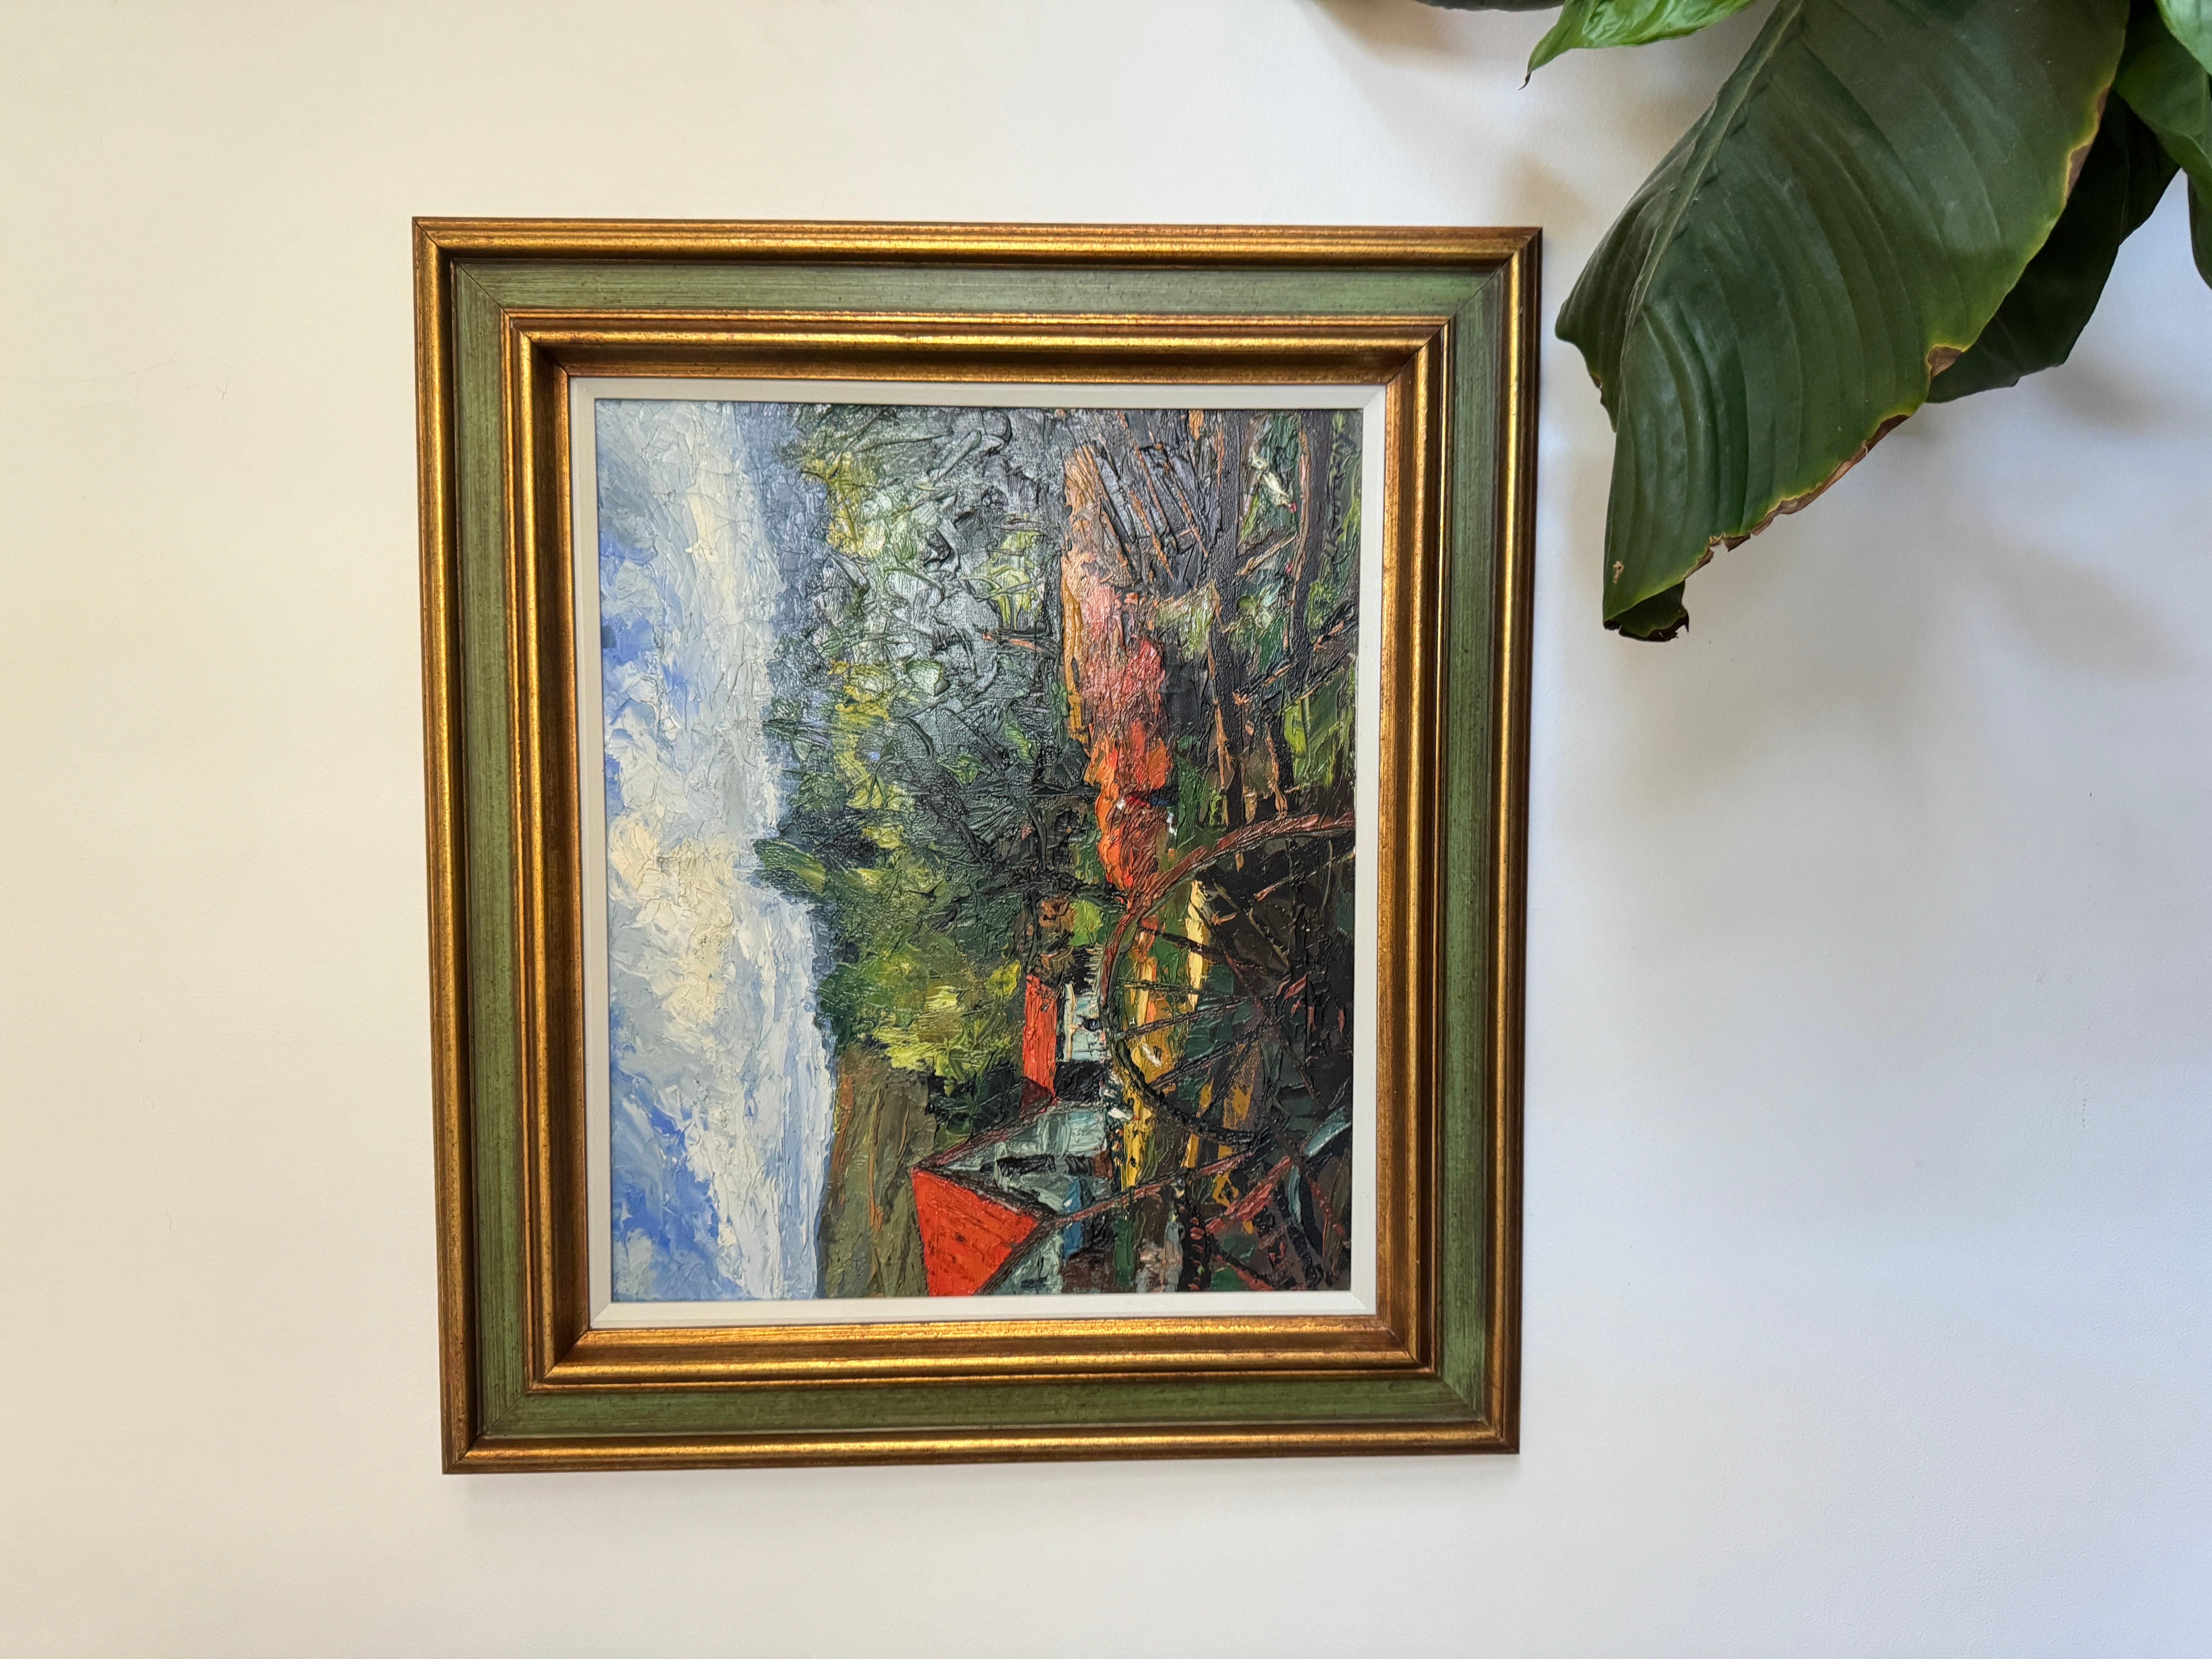 Original Pastoral Oil Painting by J. Koutachy in Gold Colored Frame
